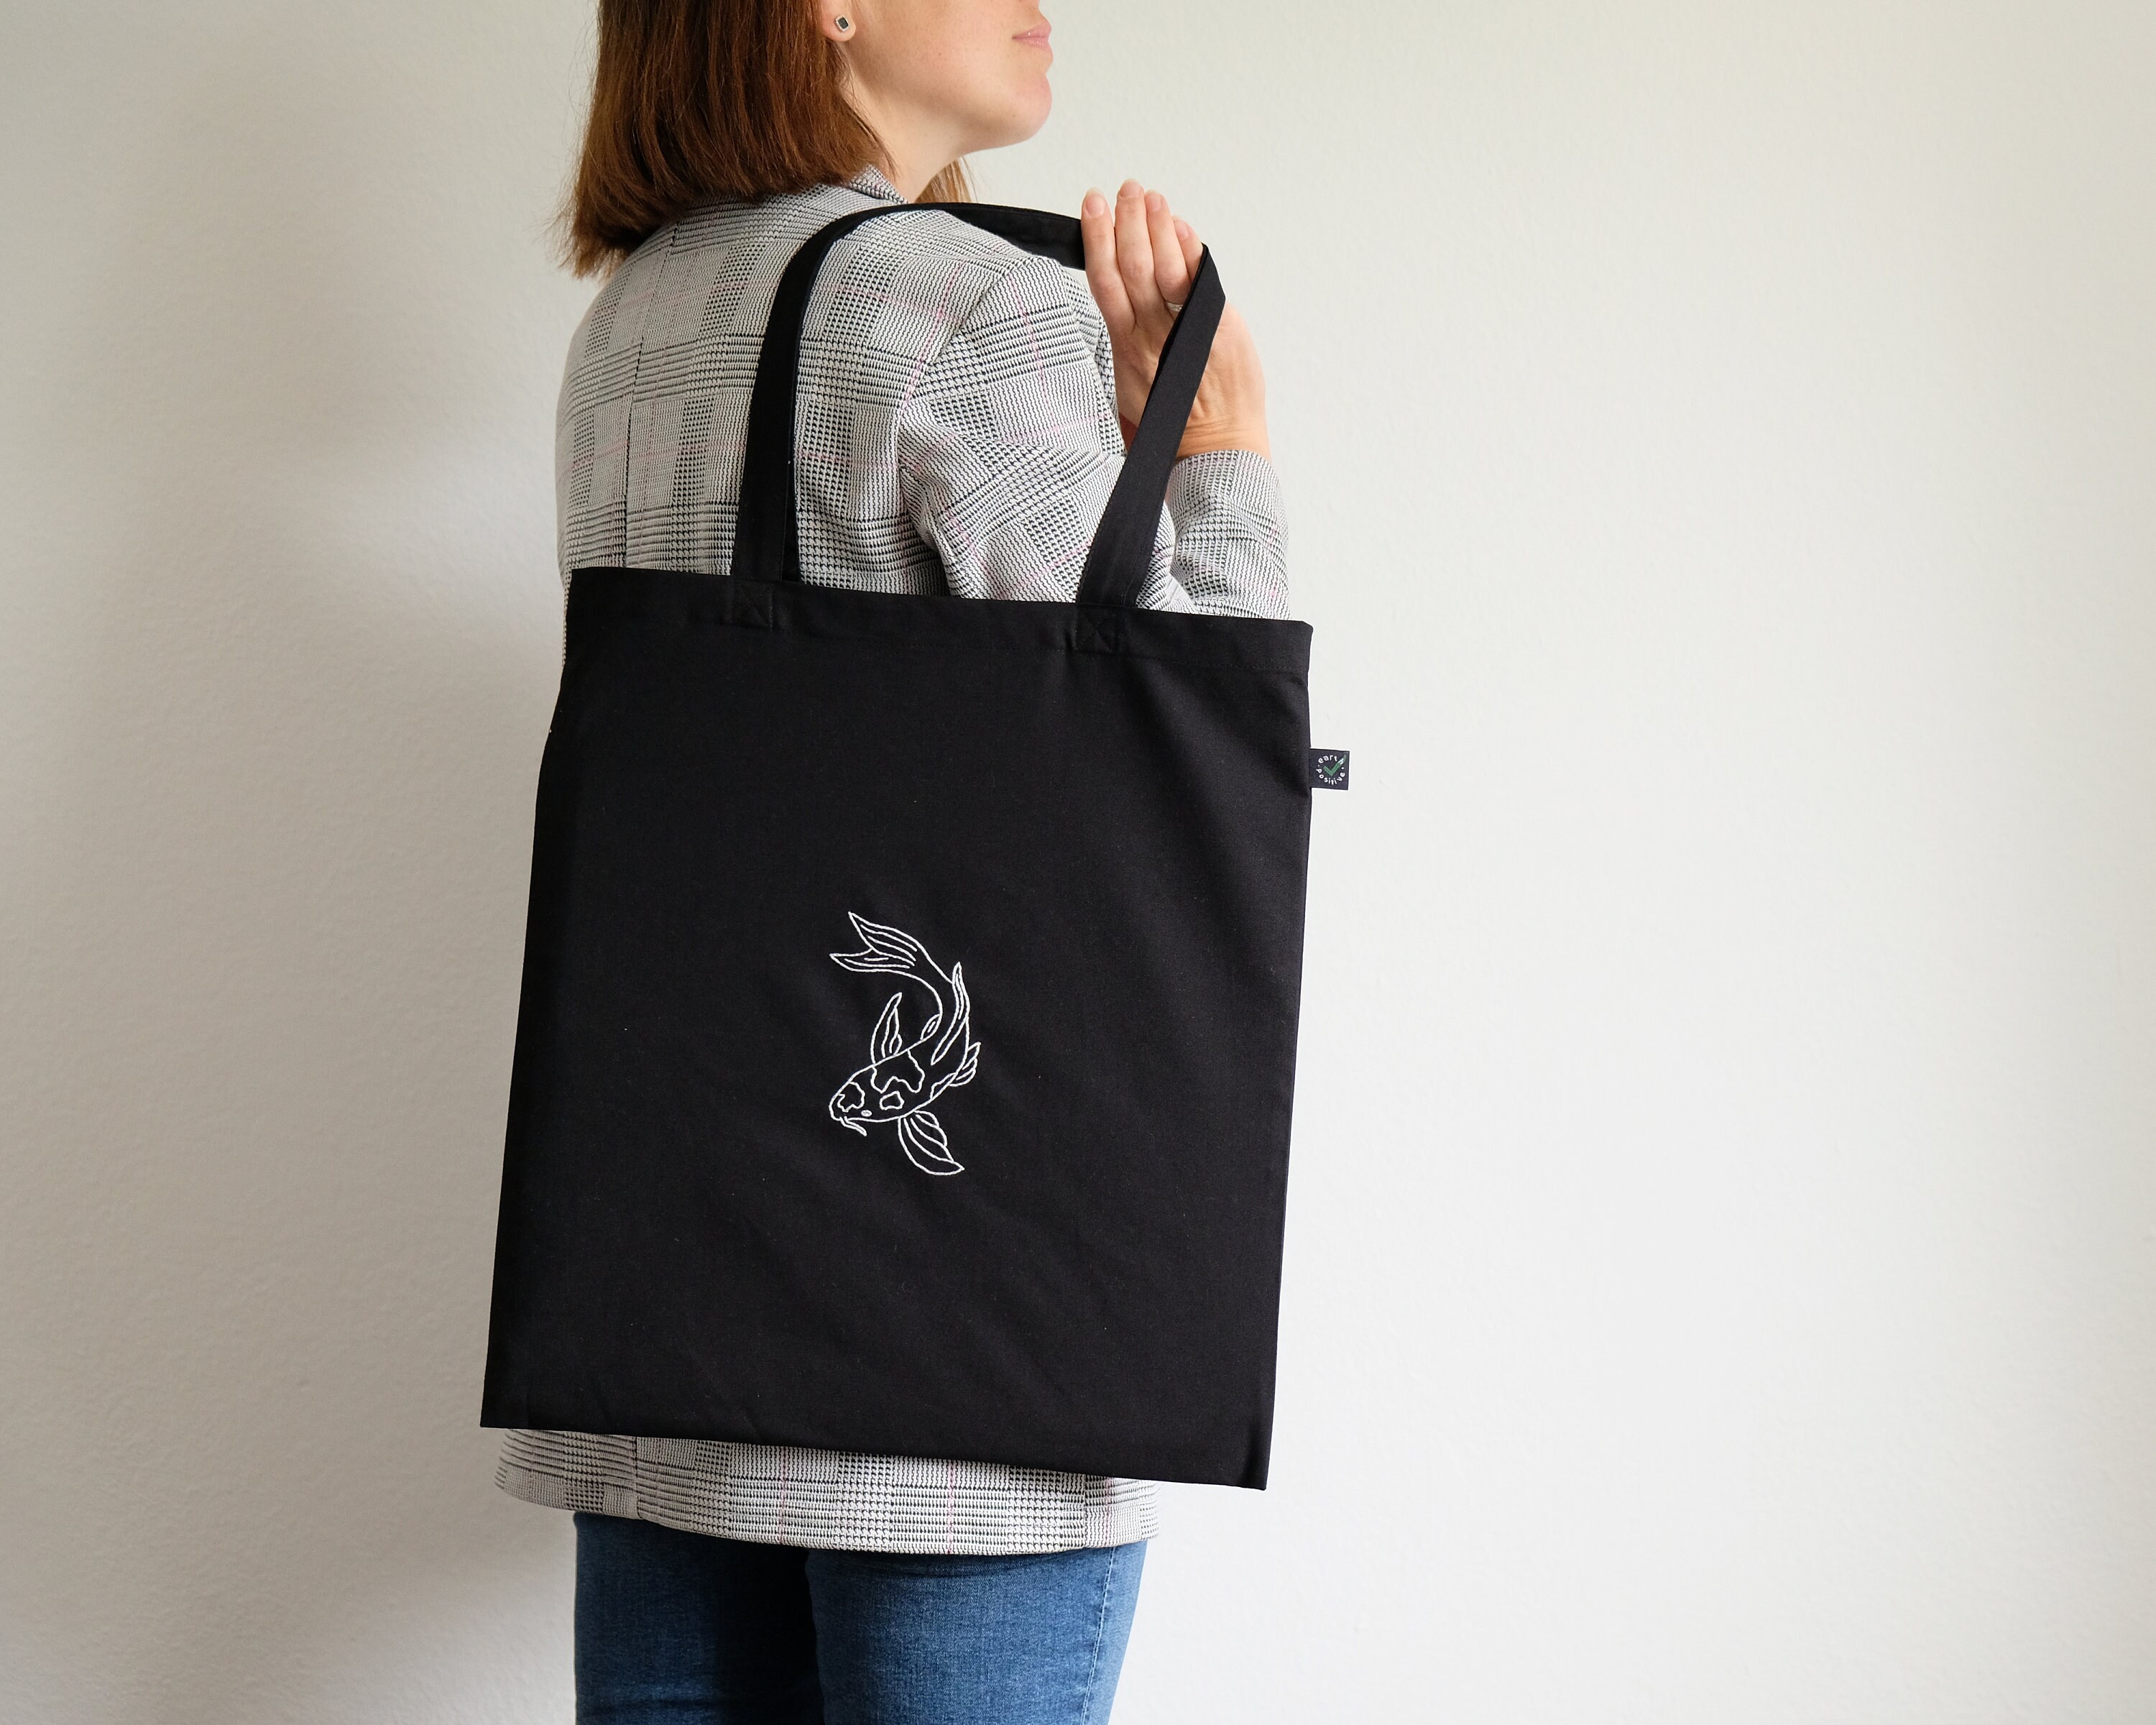 Black Tote Bag With Hand Embroidery Koi Fish Aesthetic Eco | Etsy